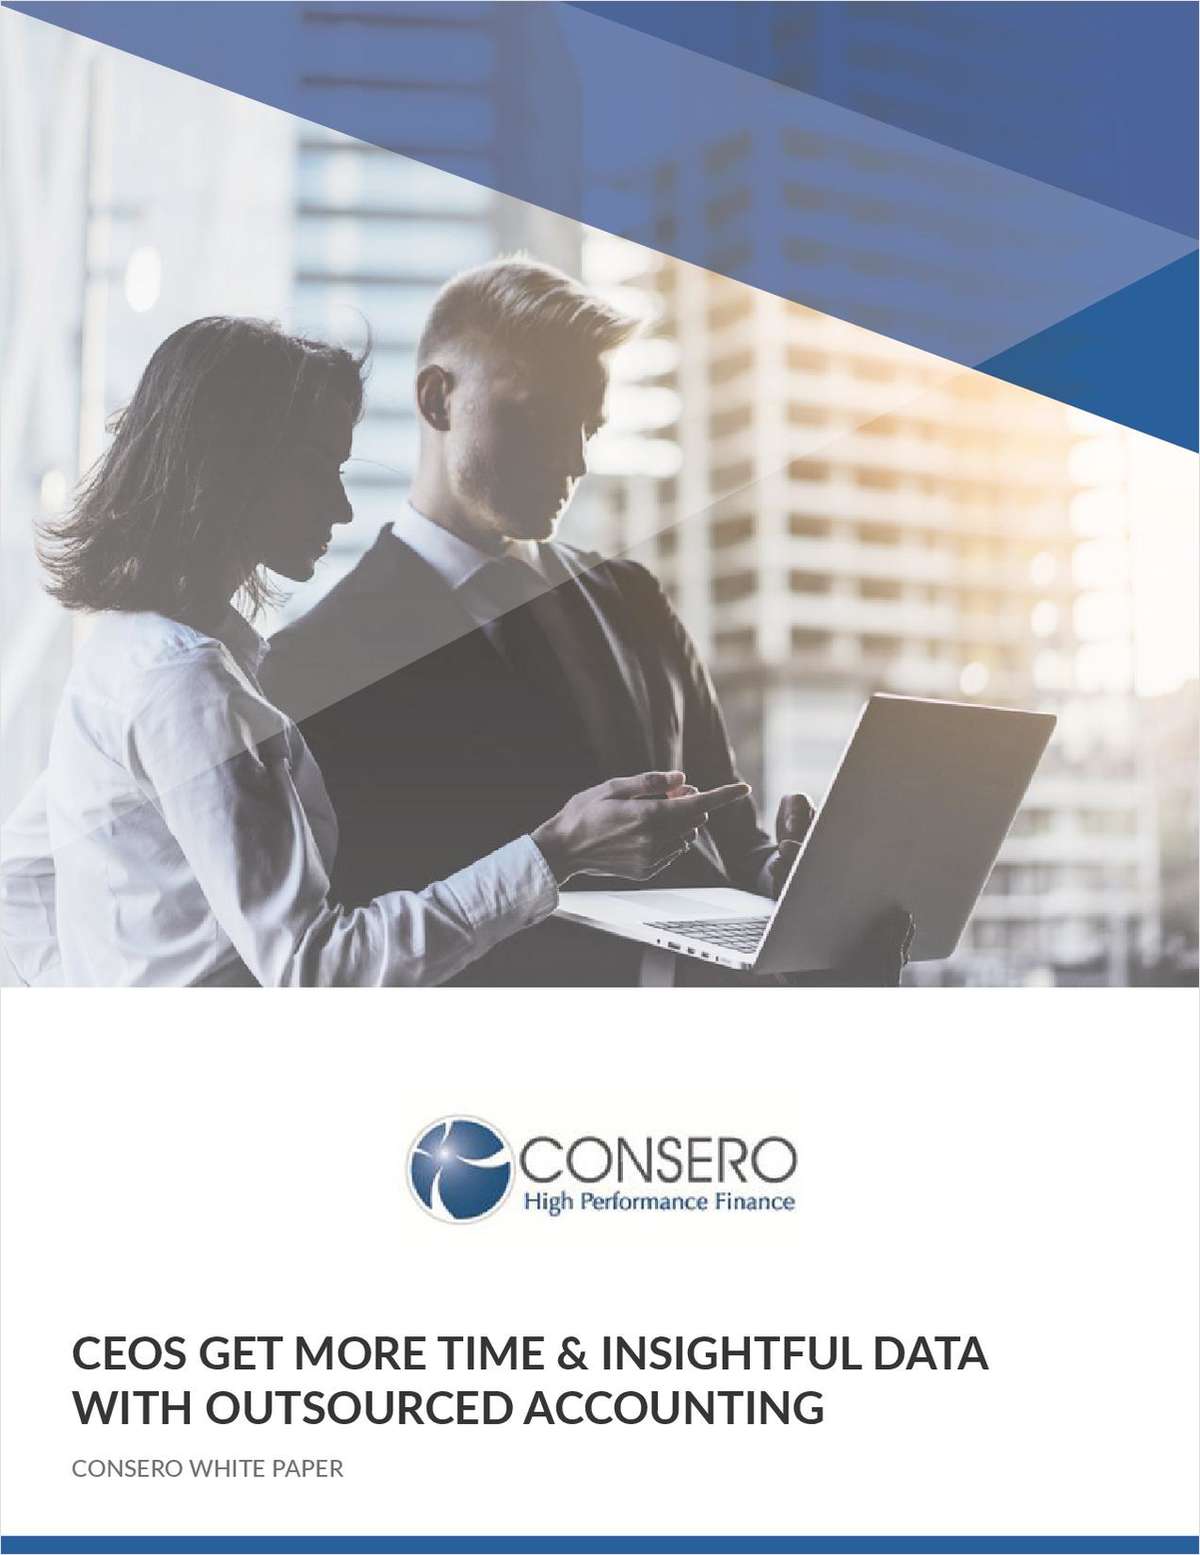 Request your complimentary white paper: 'CEOs Get More Time & Insightful Data with Outsourced Accounting'